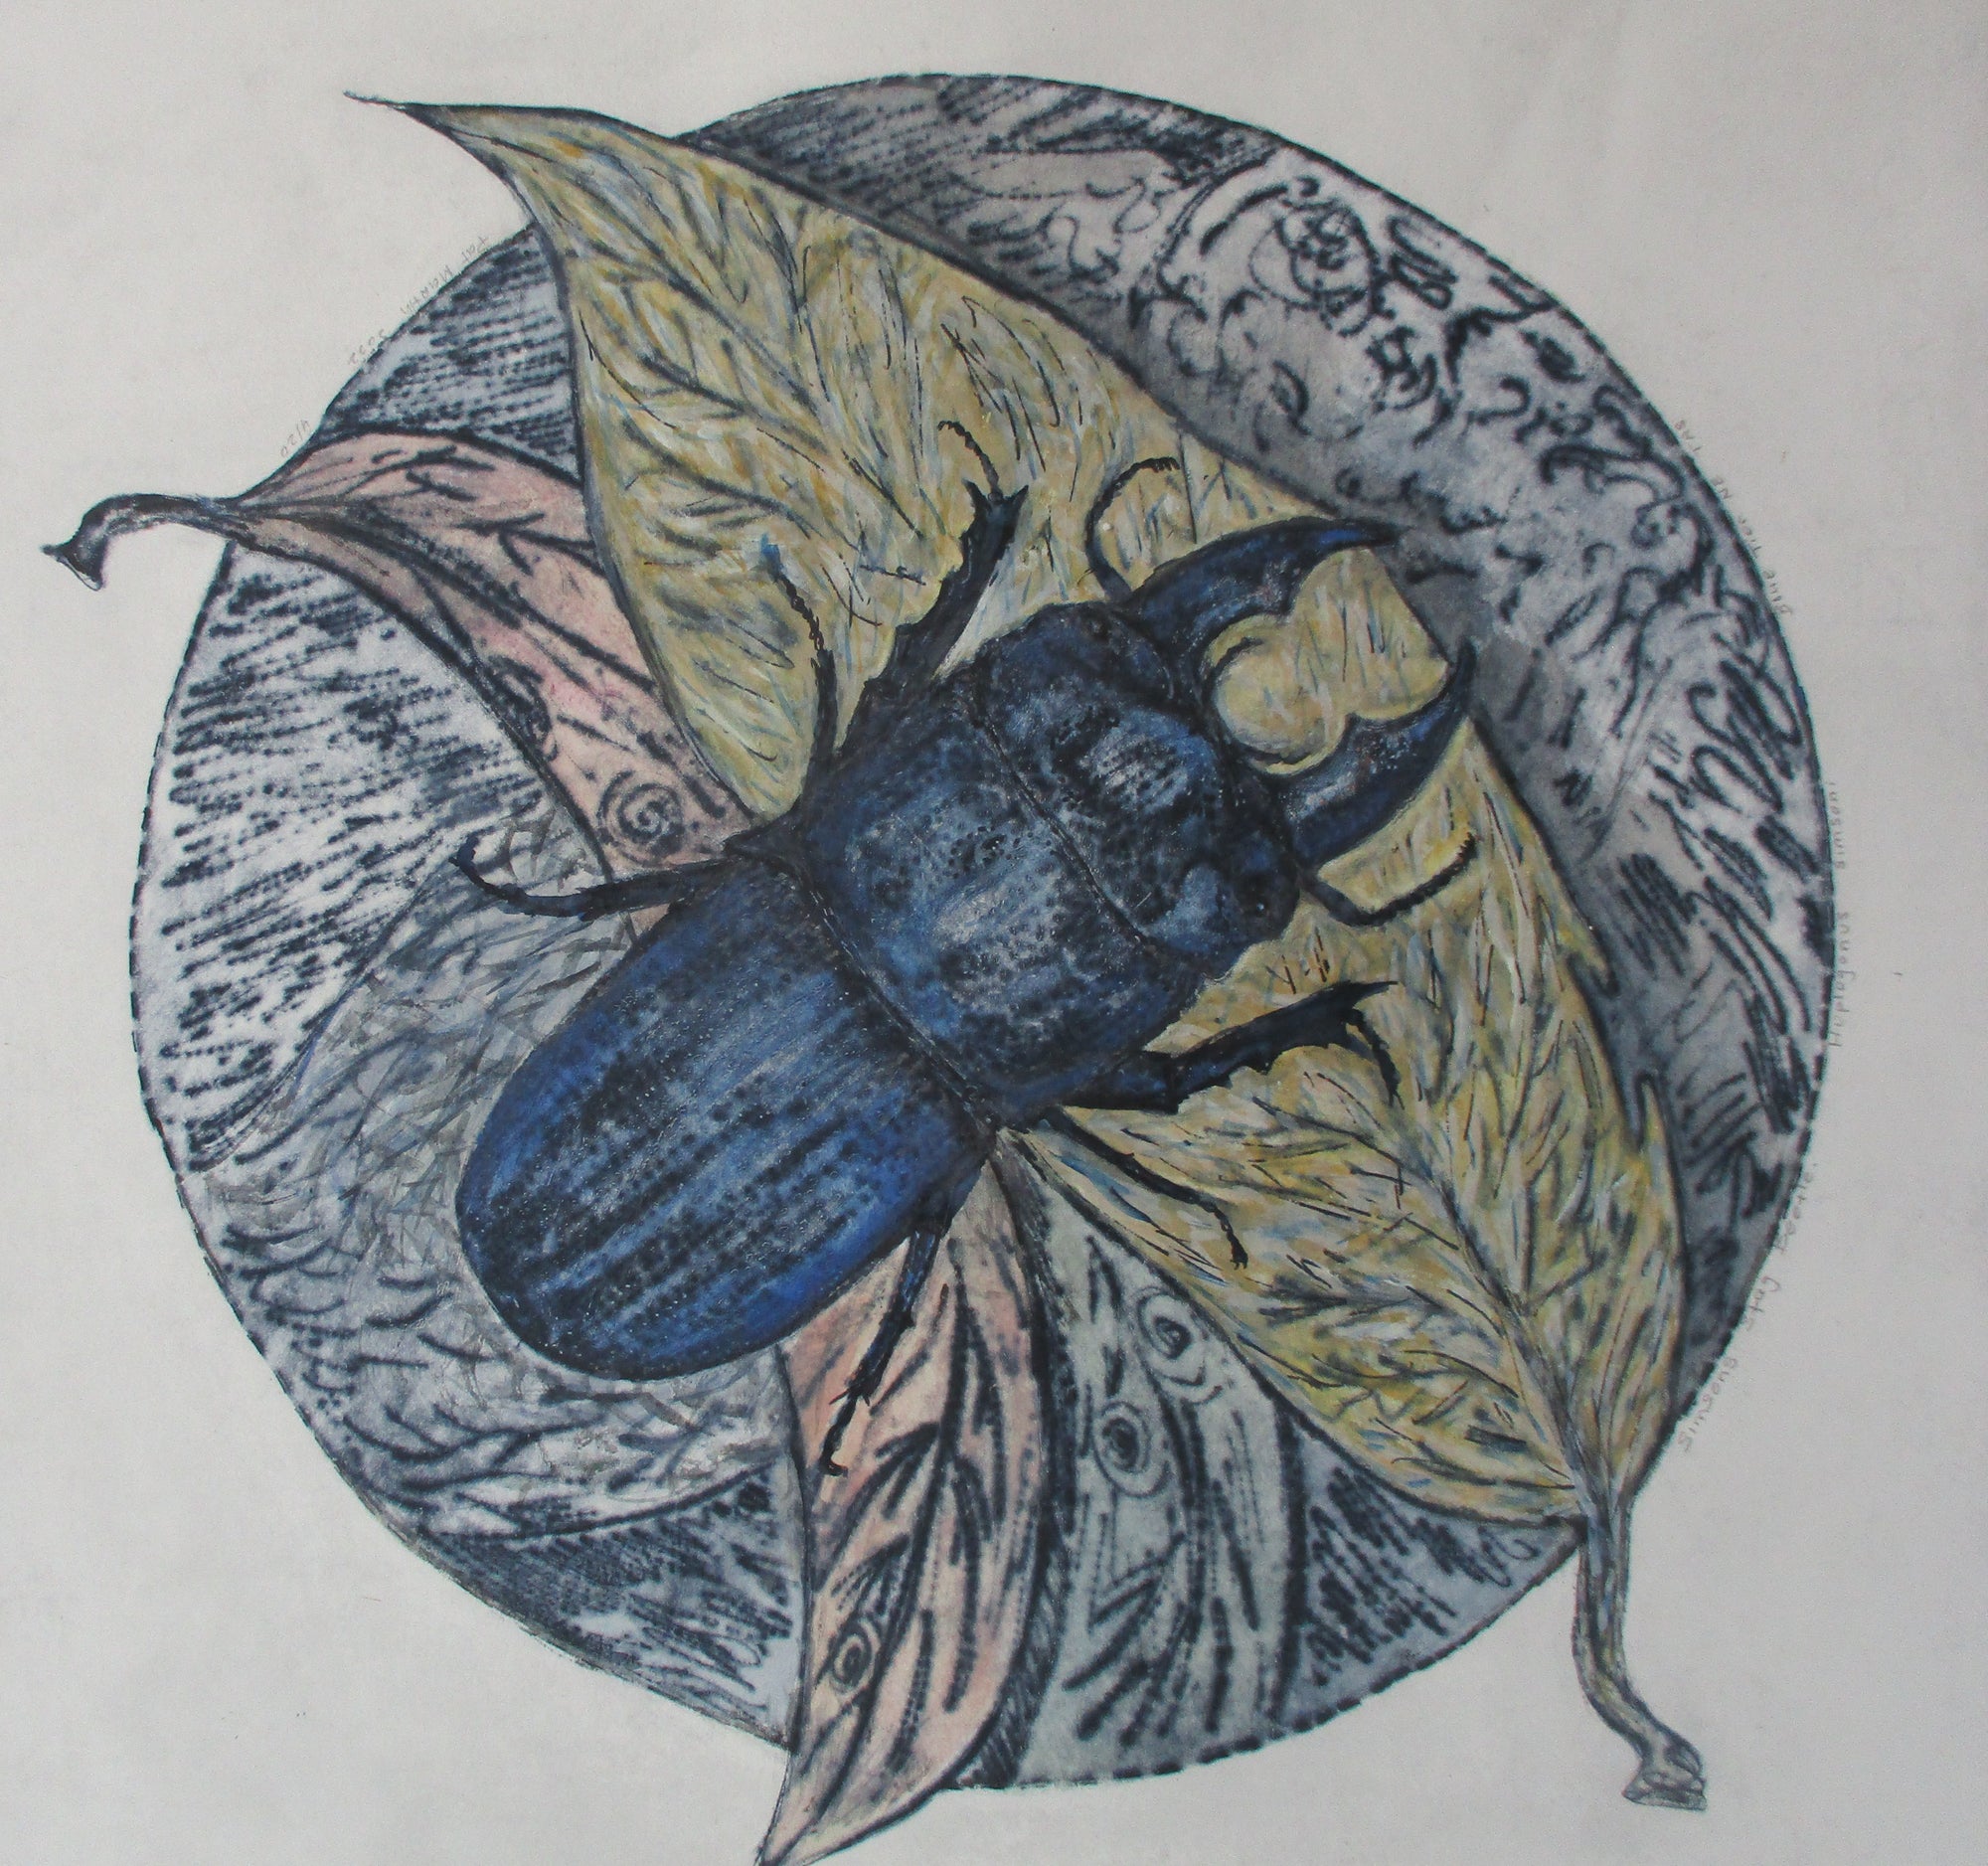 Patricia Martin - Simpsons stag beetle